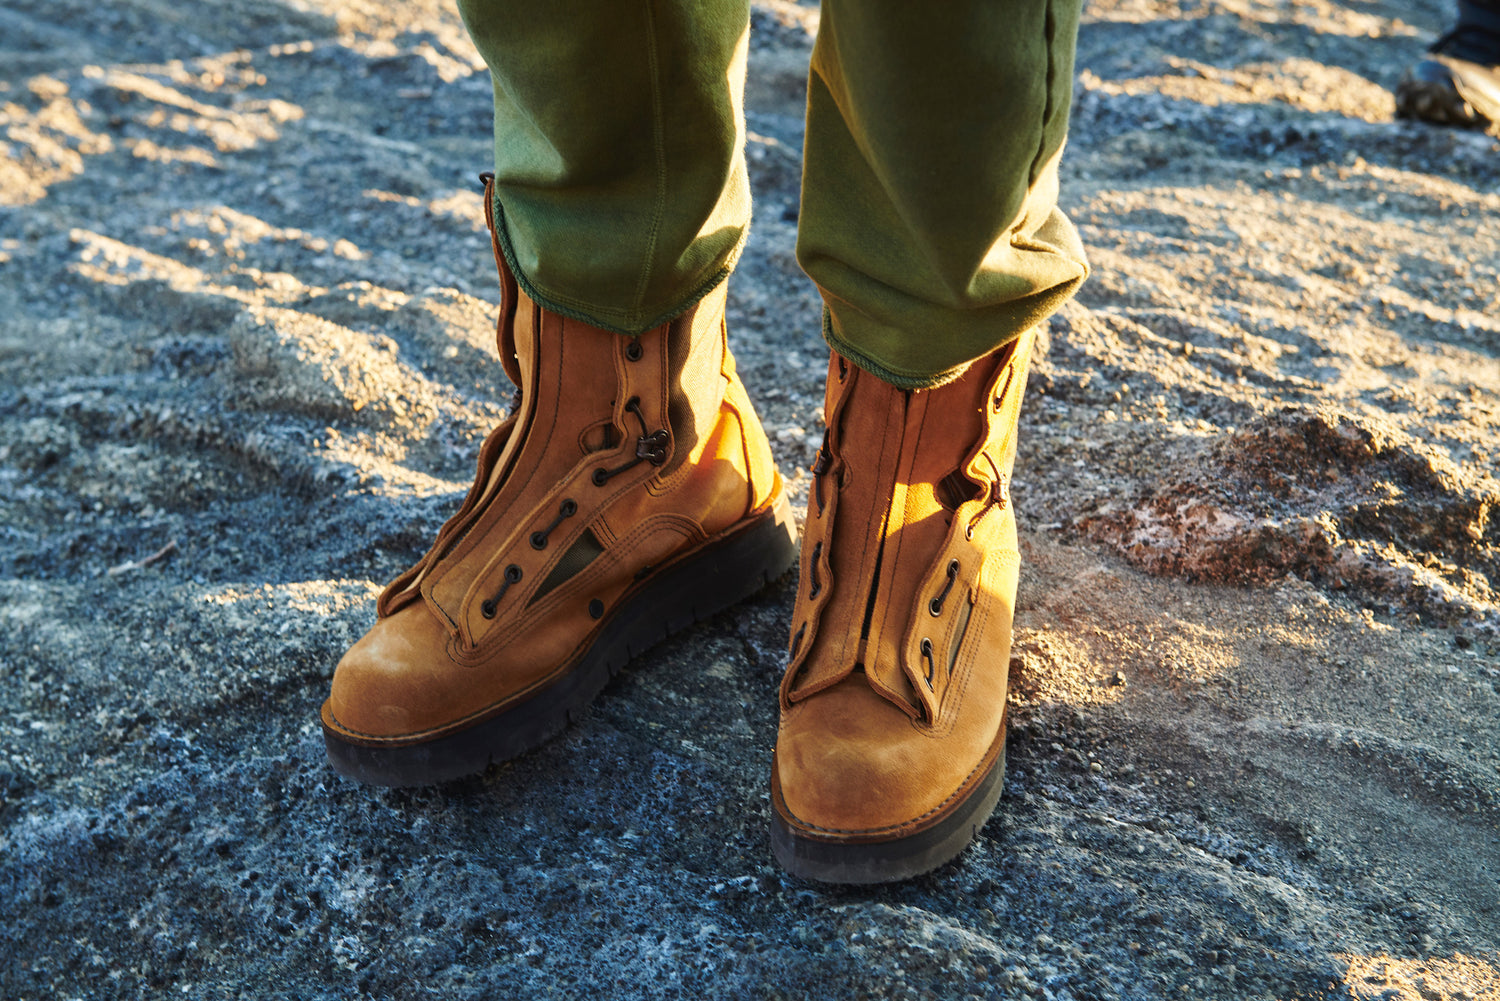 White Mountaineering × Danner Boots – White Mountaineering ...